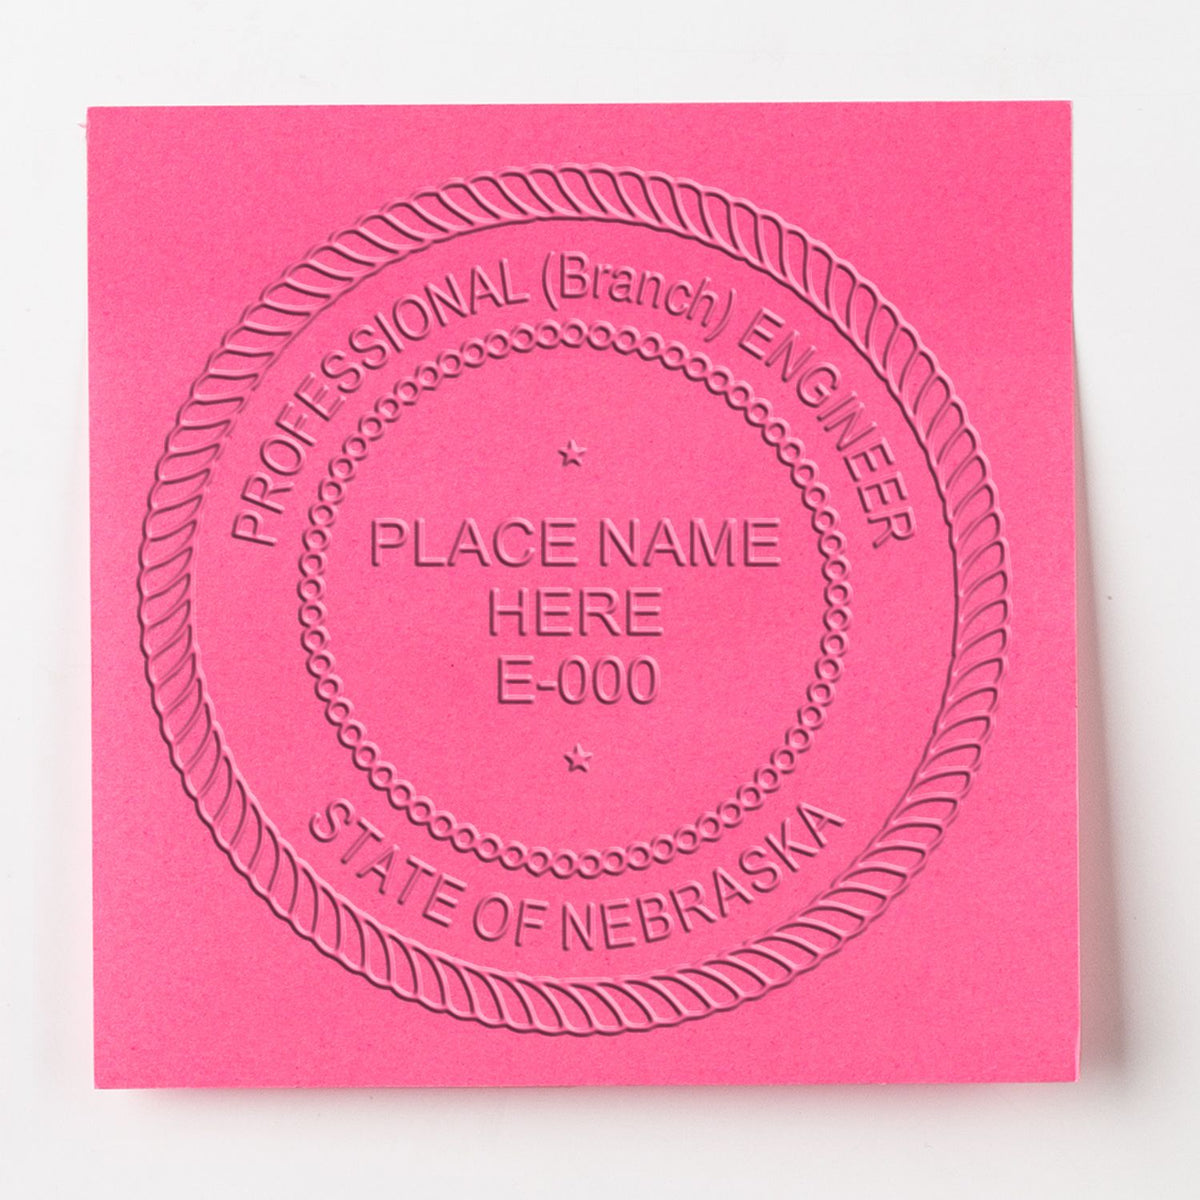 An in use photo of the Gift Nebraska Engineer Seal showing a sample imprint on a cardstock